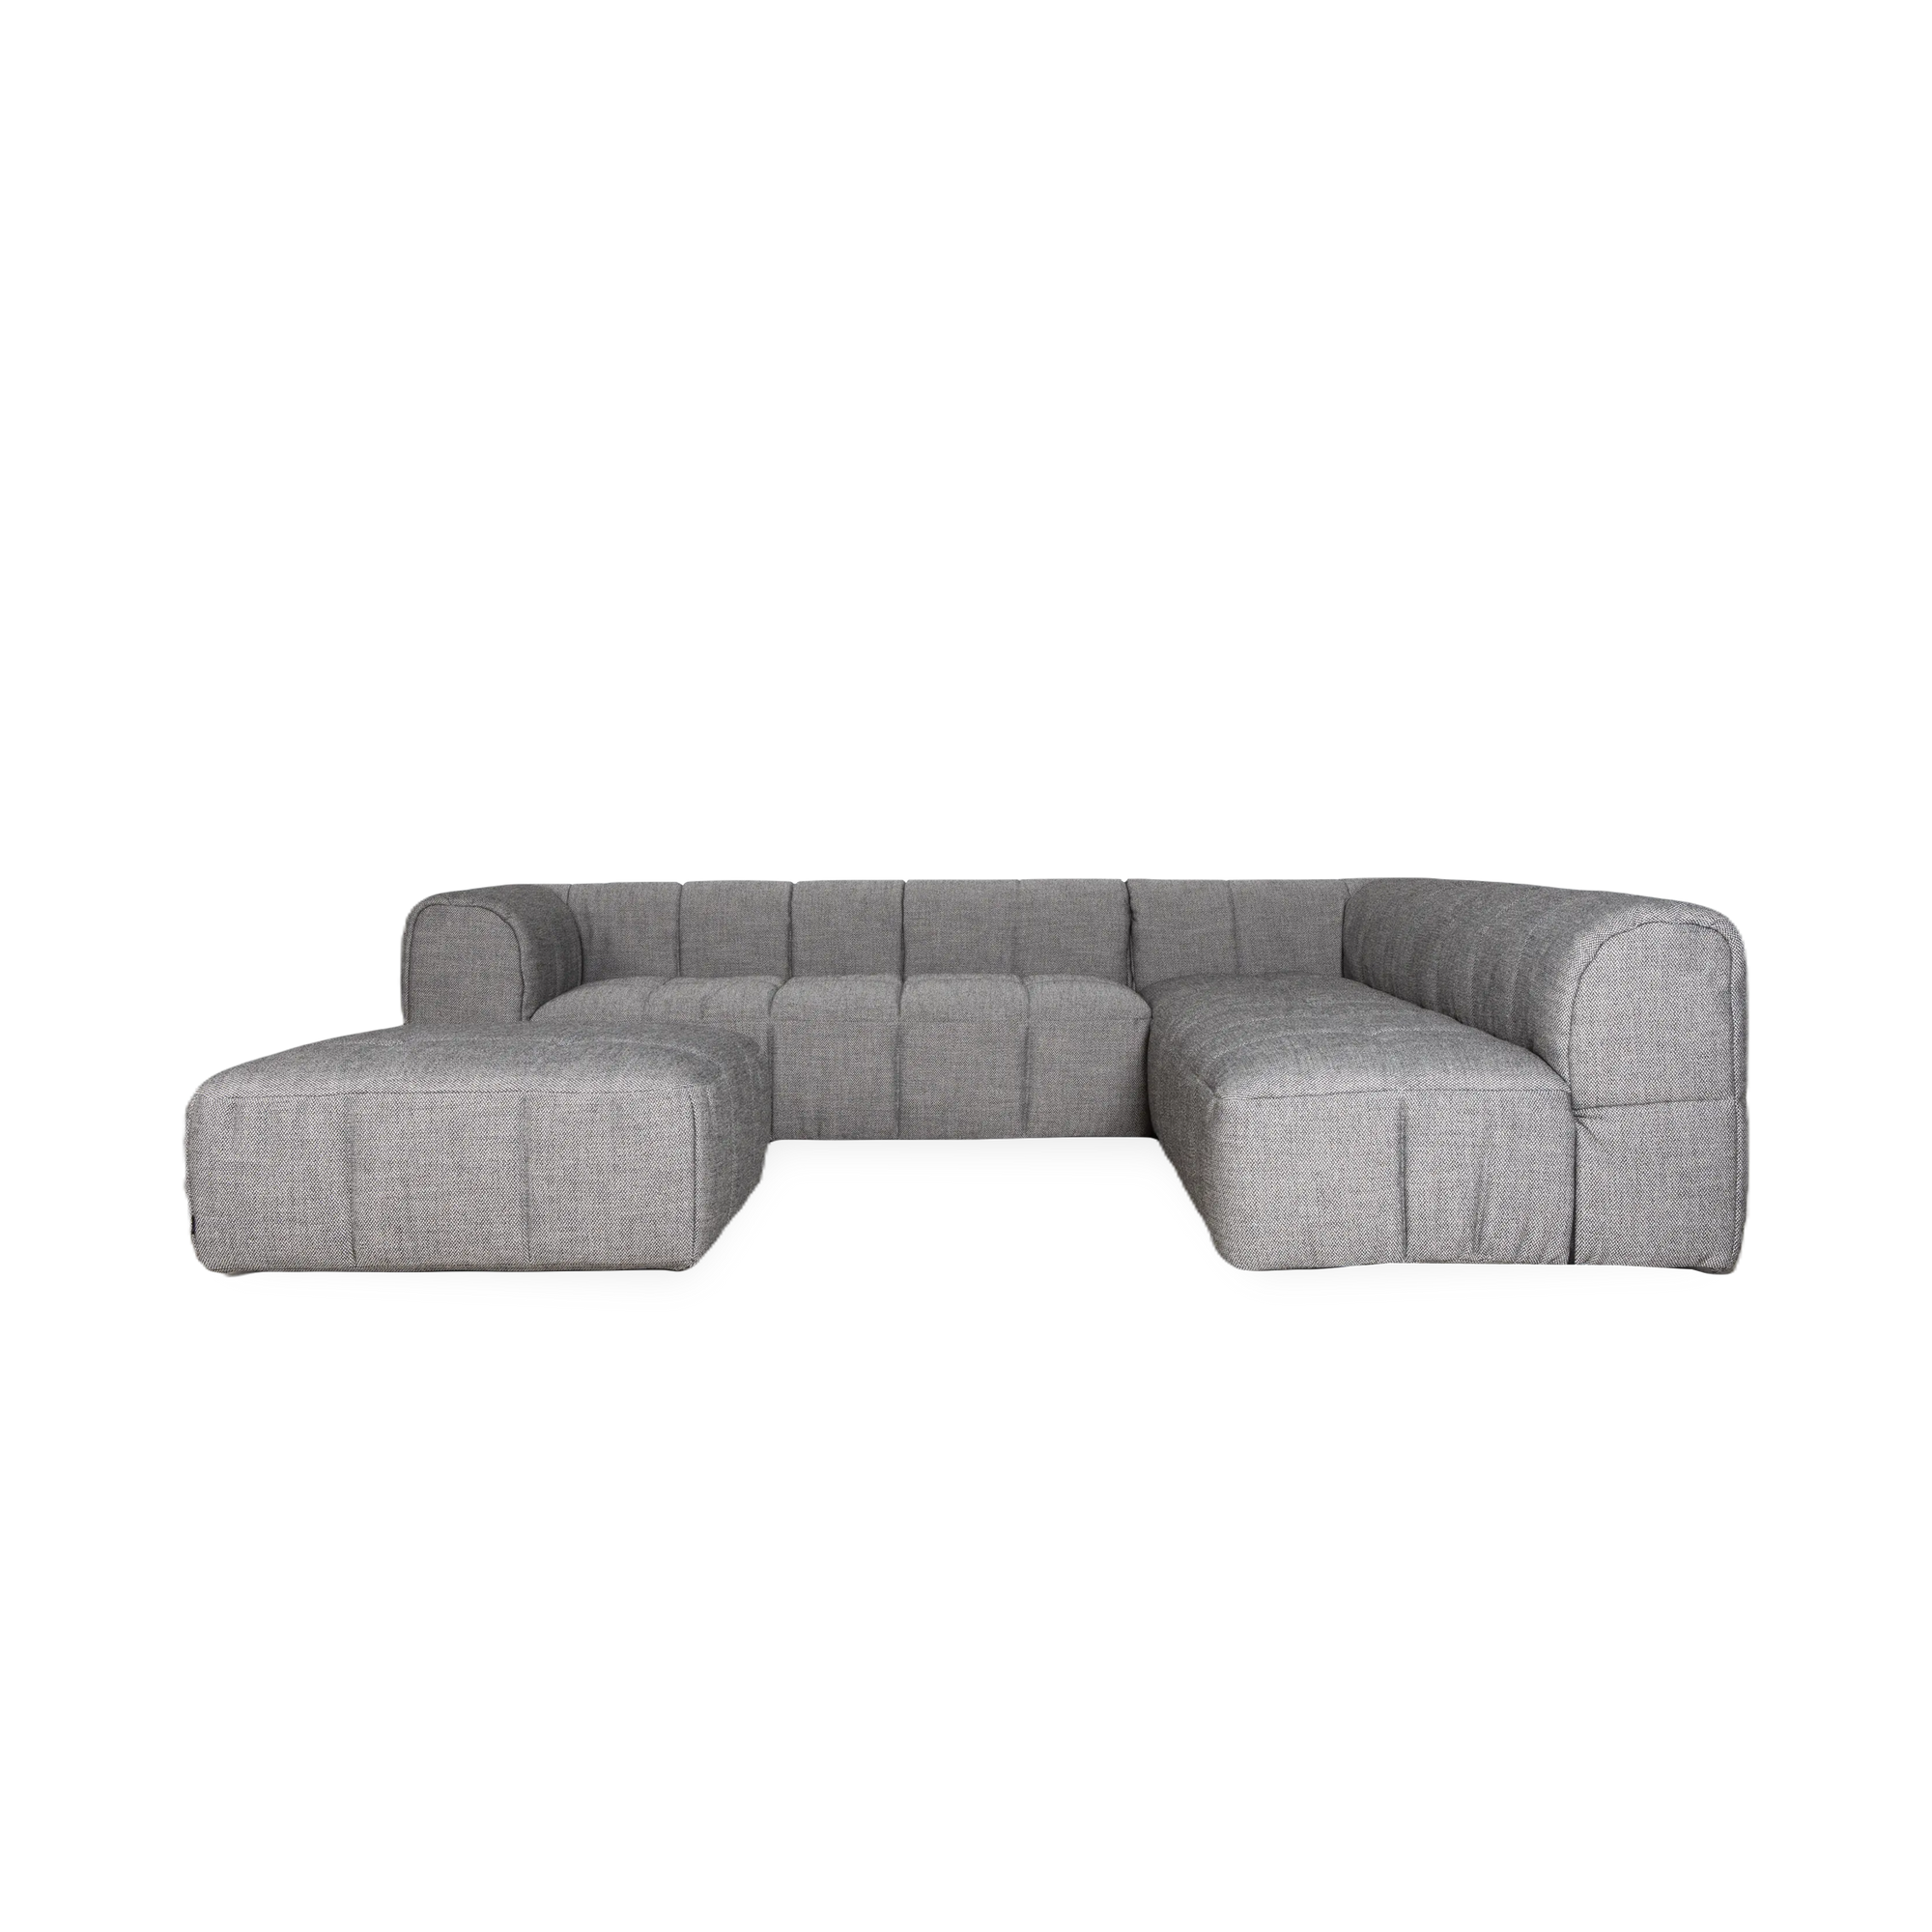 An iconic design, Cini Boeri's Strips Corner Sectional is a groundbreaking piece that epitomizes modern design innovation.